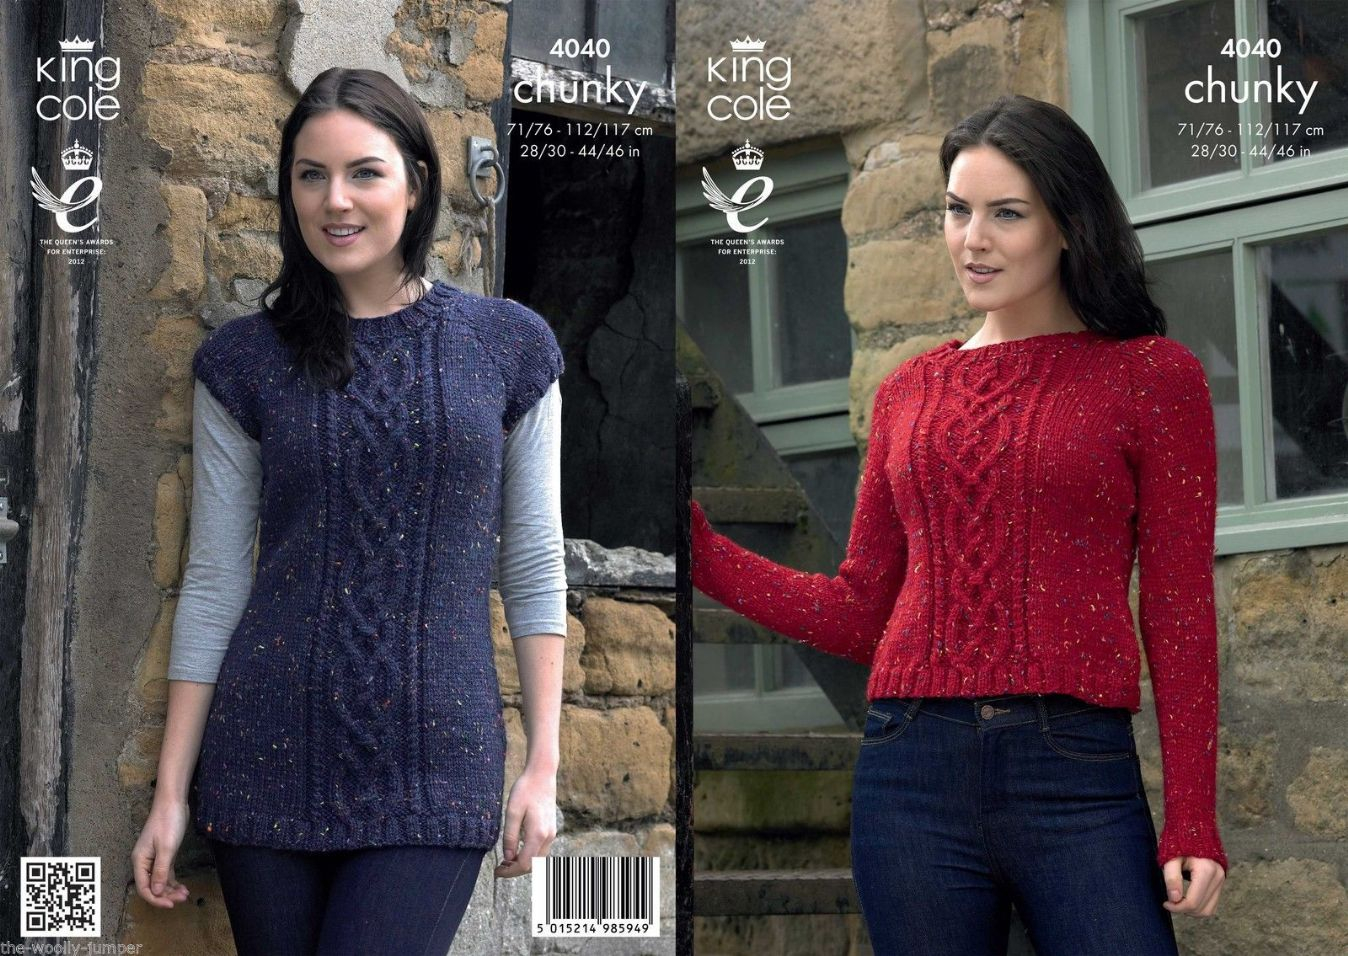 Tweed Knitting Patterns 4040 King Cole Chunky Tweed Sweater Knitting Pattern To Fit Chest 28 To 46